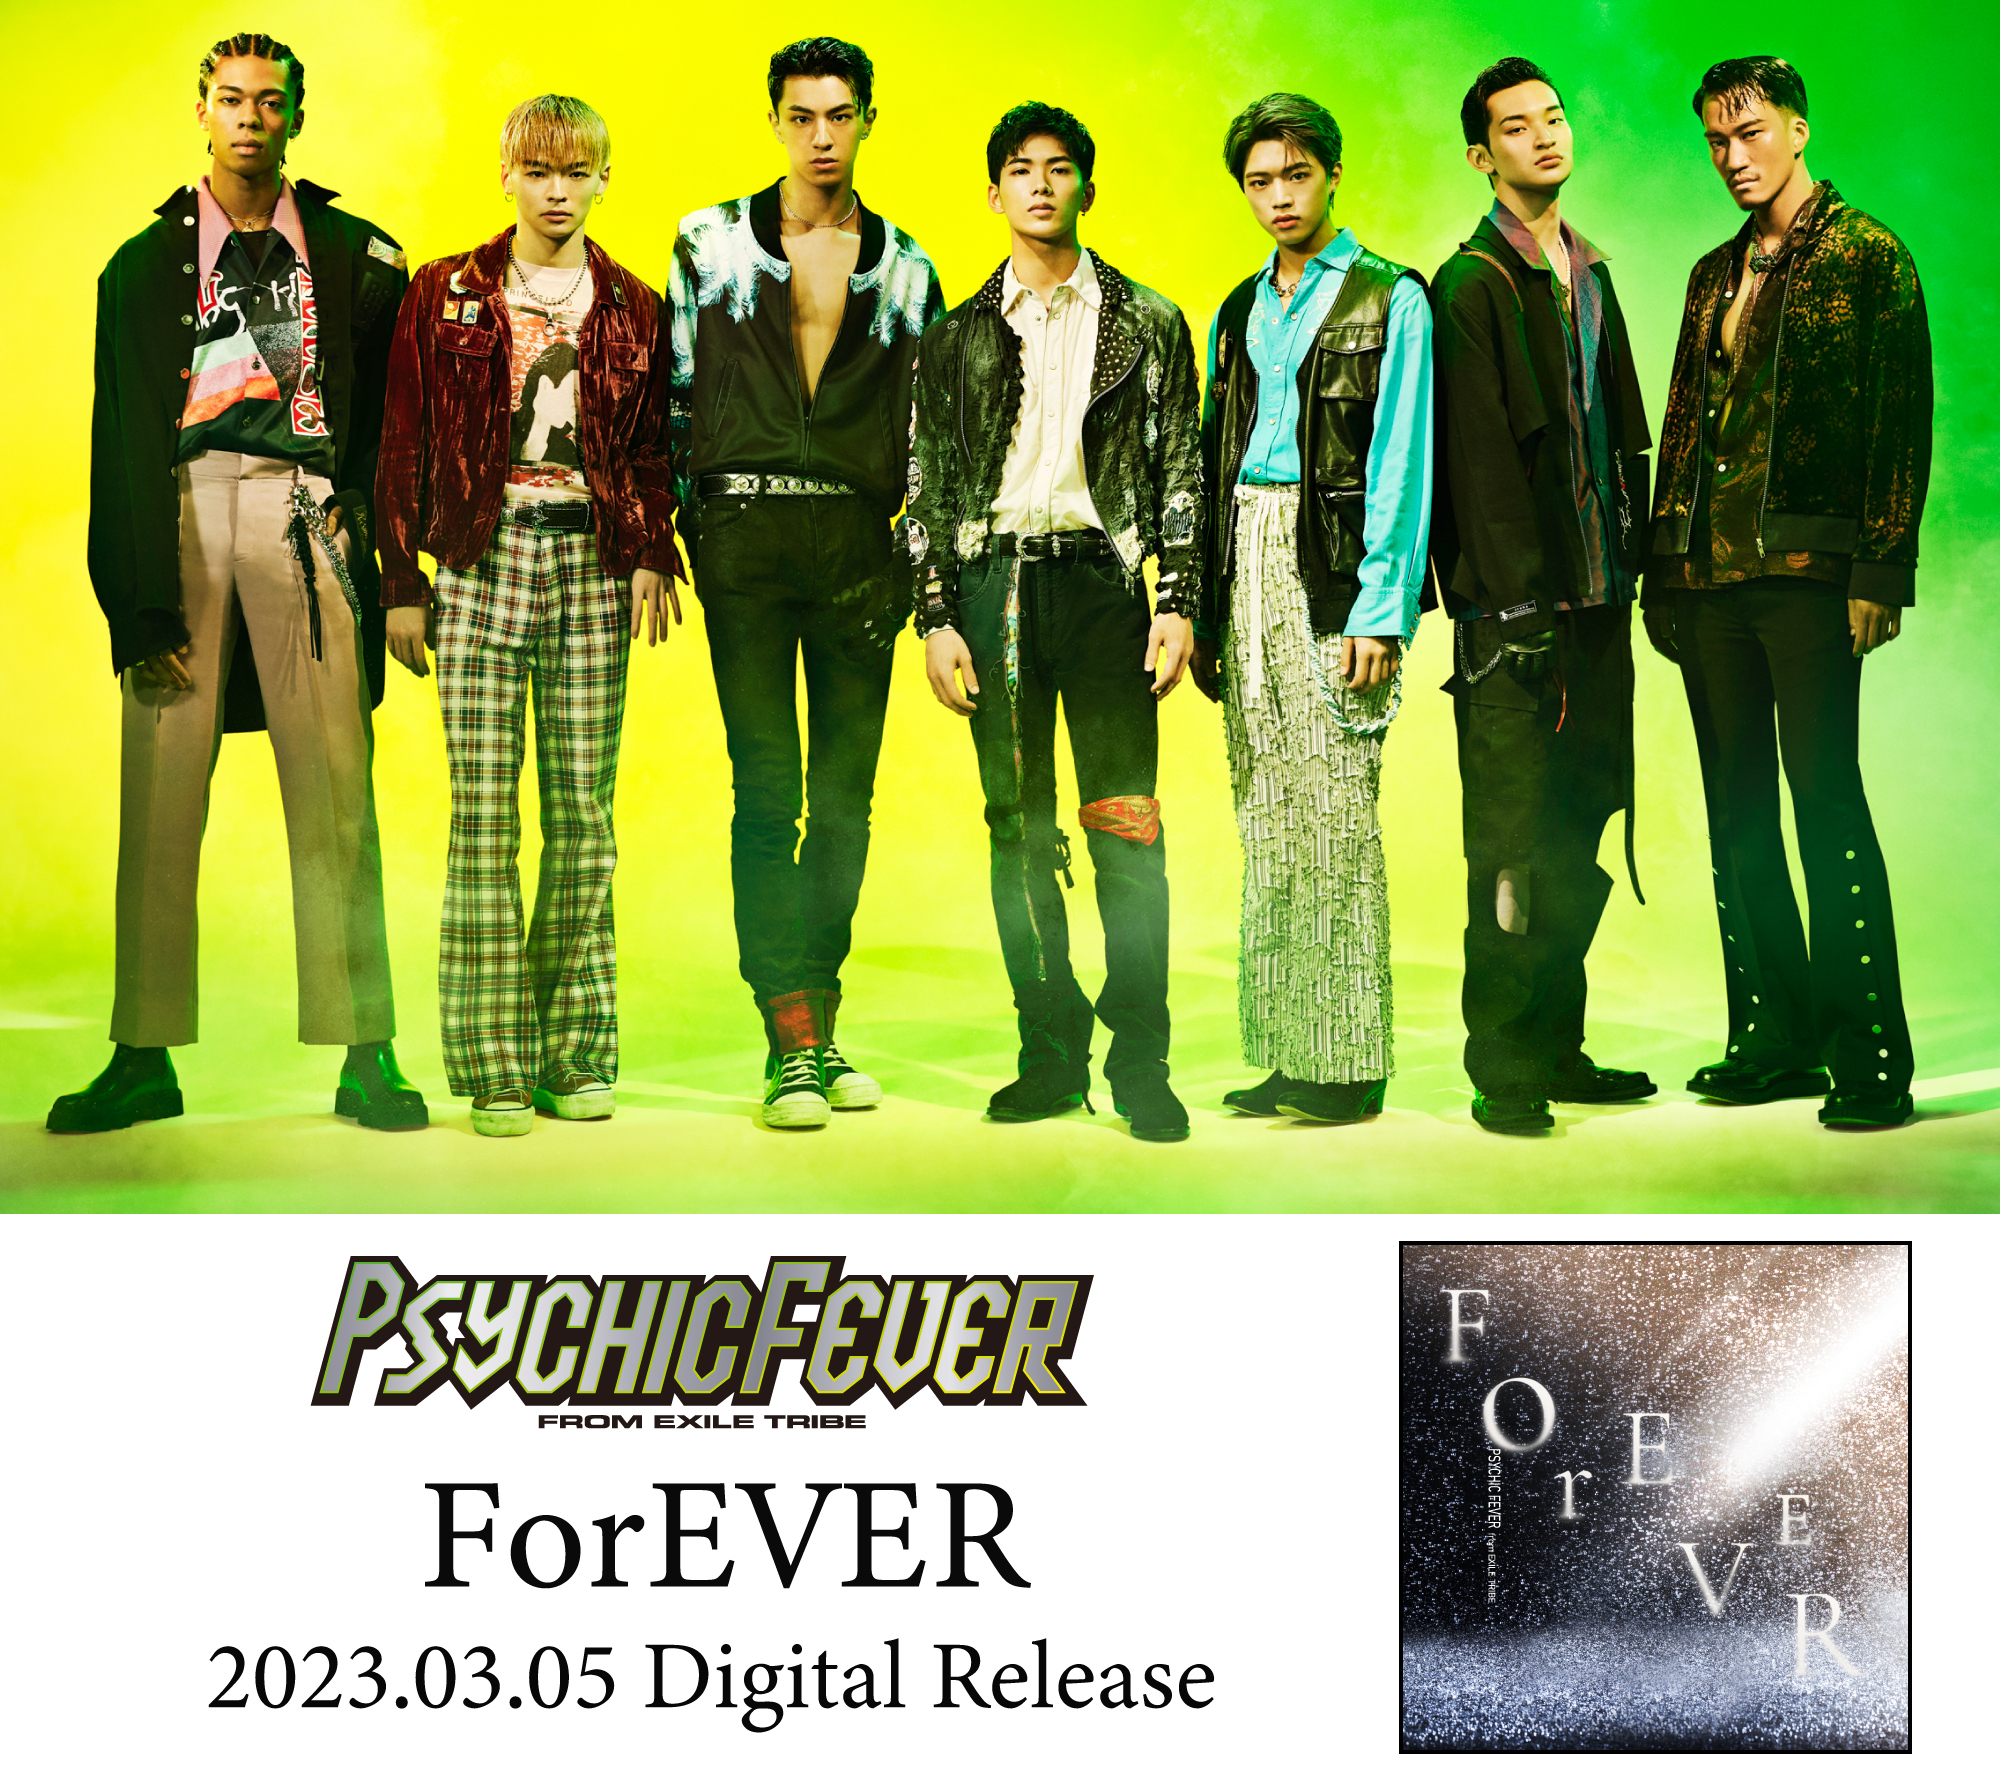 PSYCHIC FEVER from EXILE TRIBE 『ForEver』